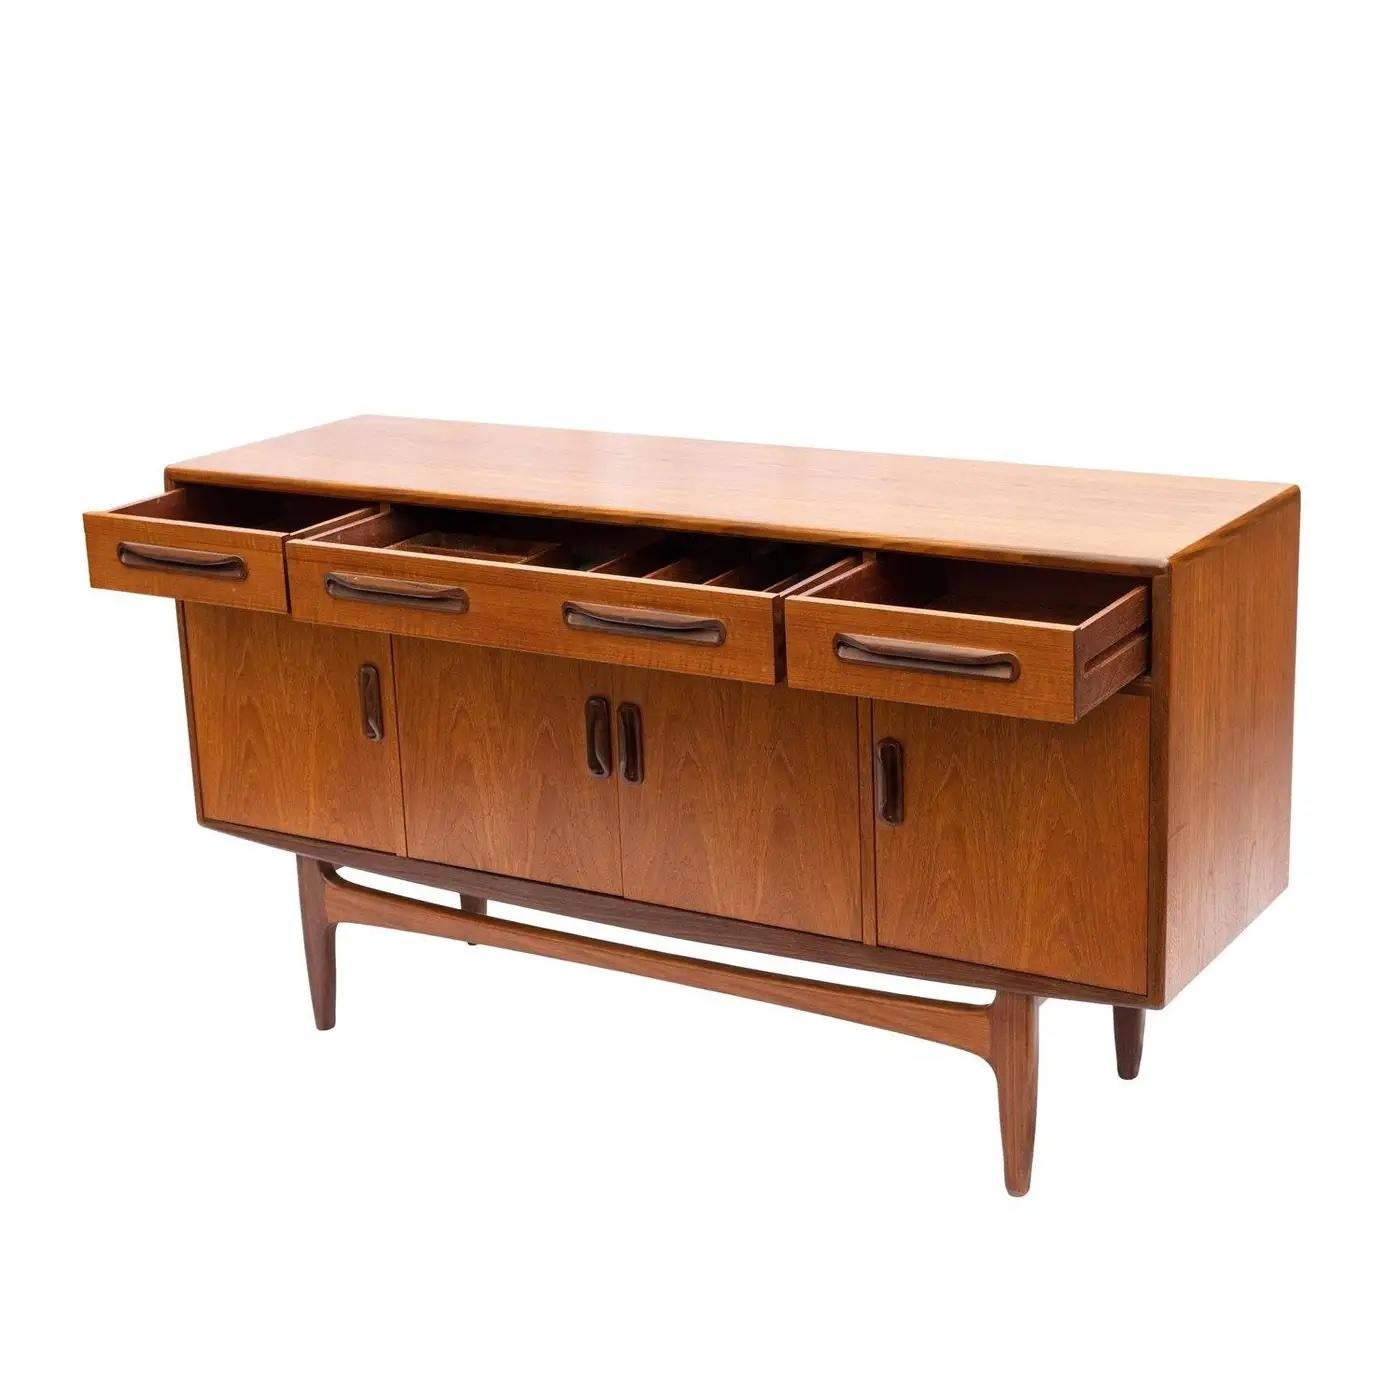 Mid-Century Teak Fresco Sideboard by v. Wilkins for G Plan, English, Ca. 1960 In Good Condition For Sale In Banner Elk, NC